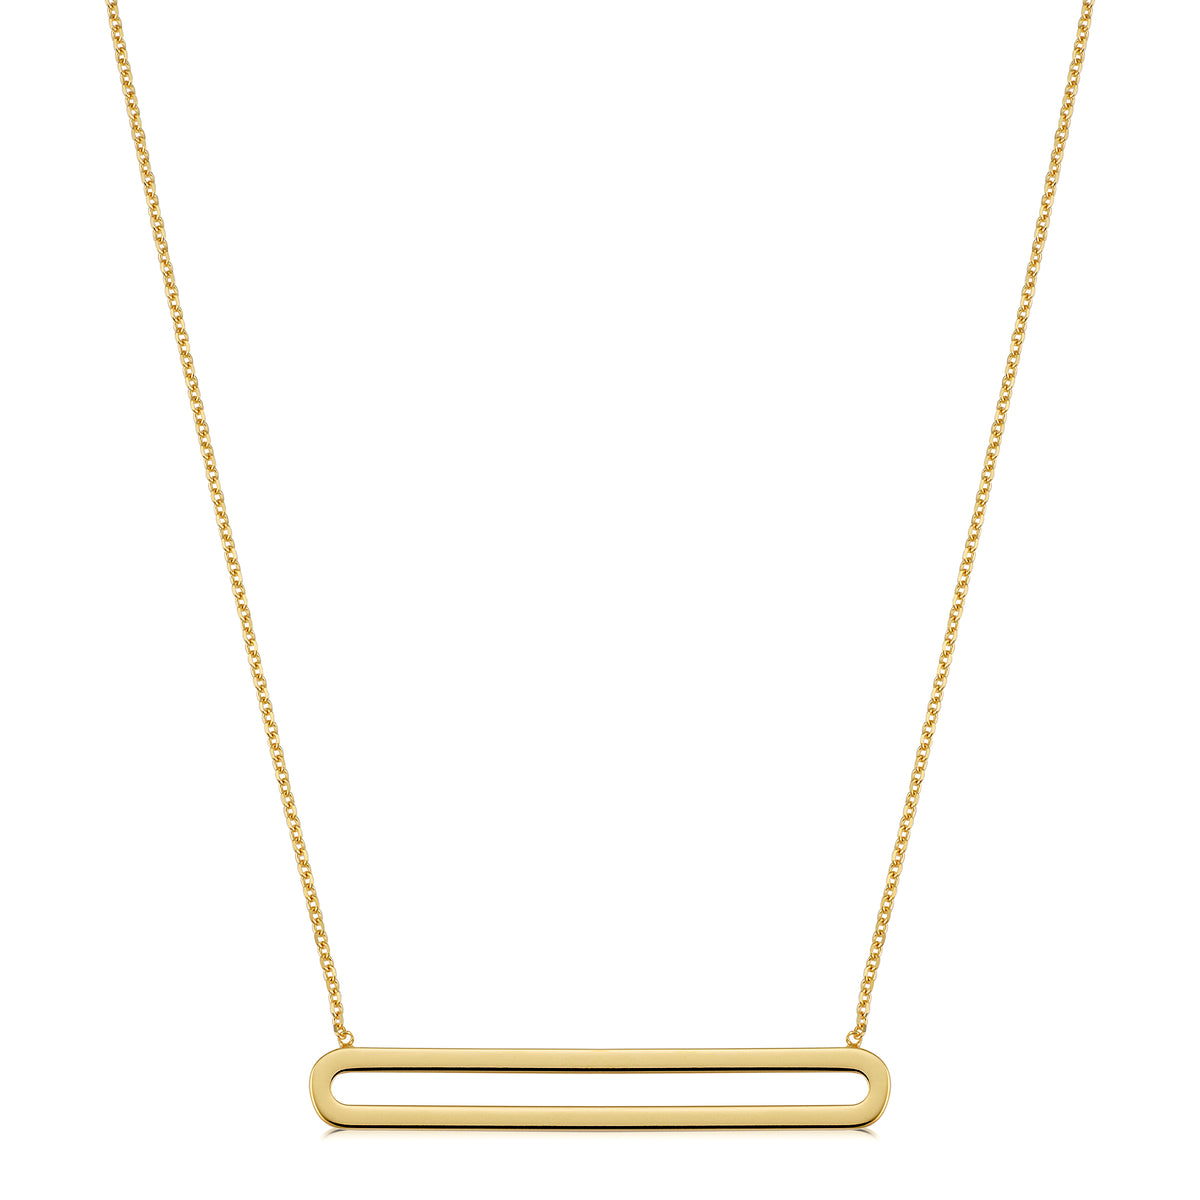 14K Yellow Gold Oval Bar Pendant Necklace, 18"